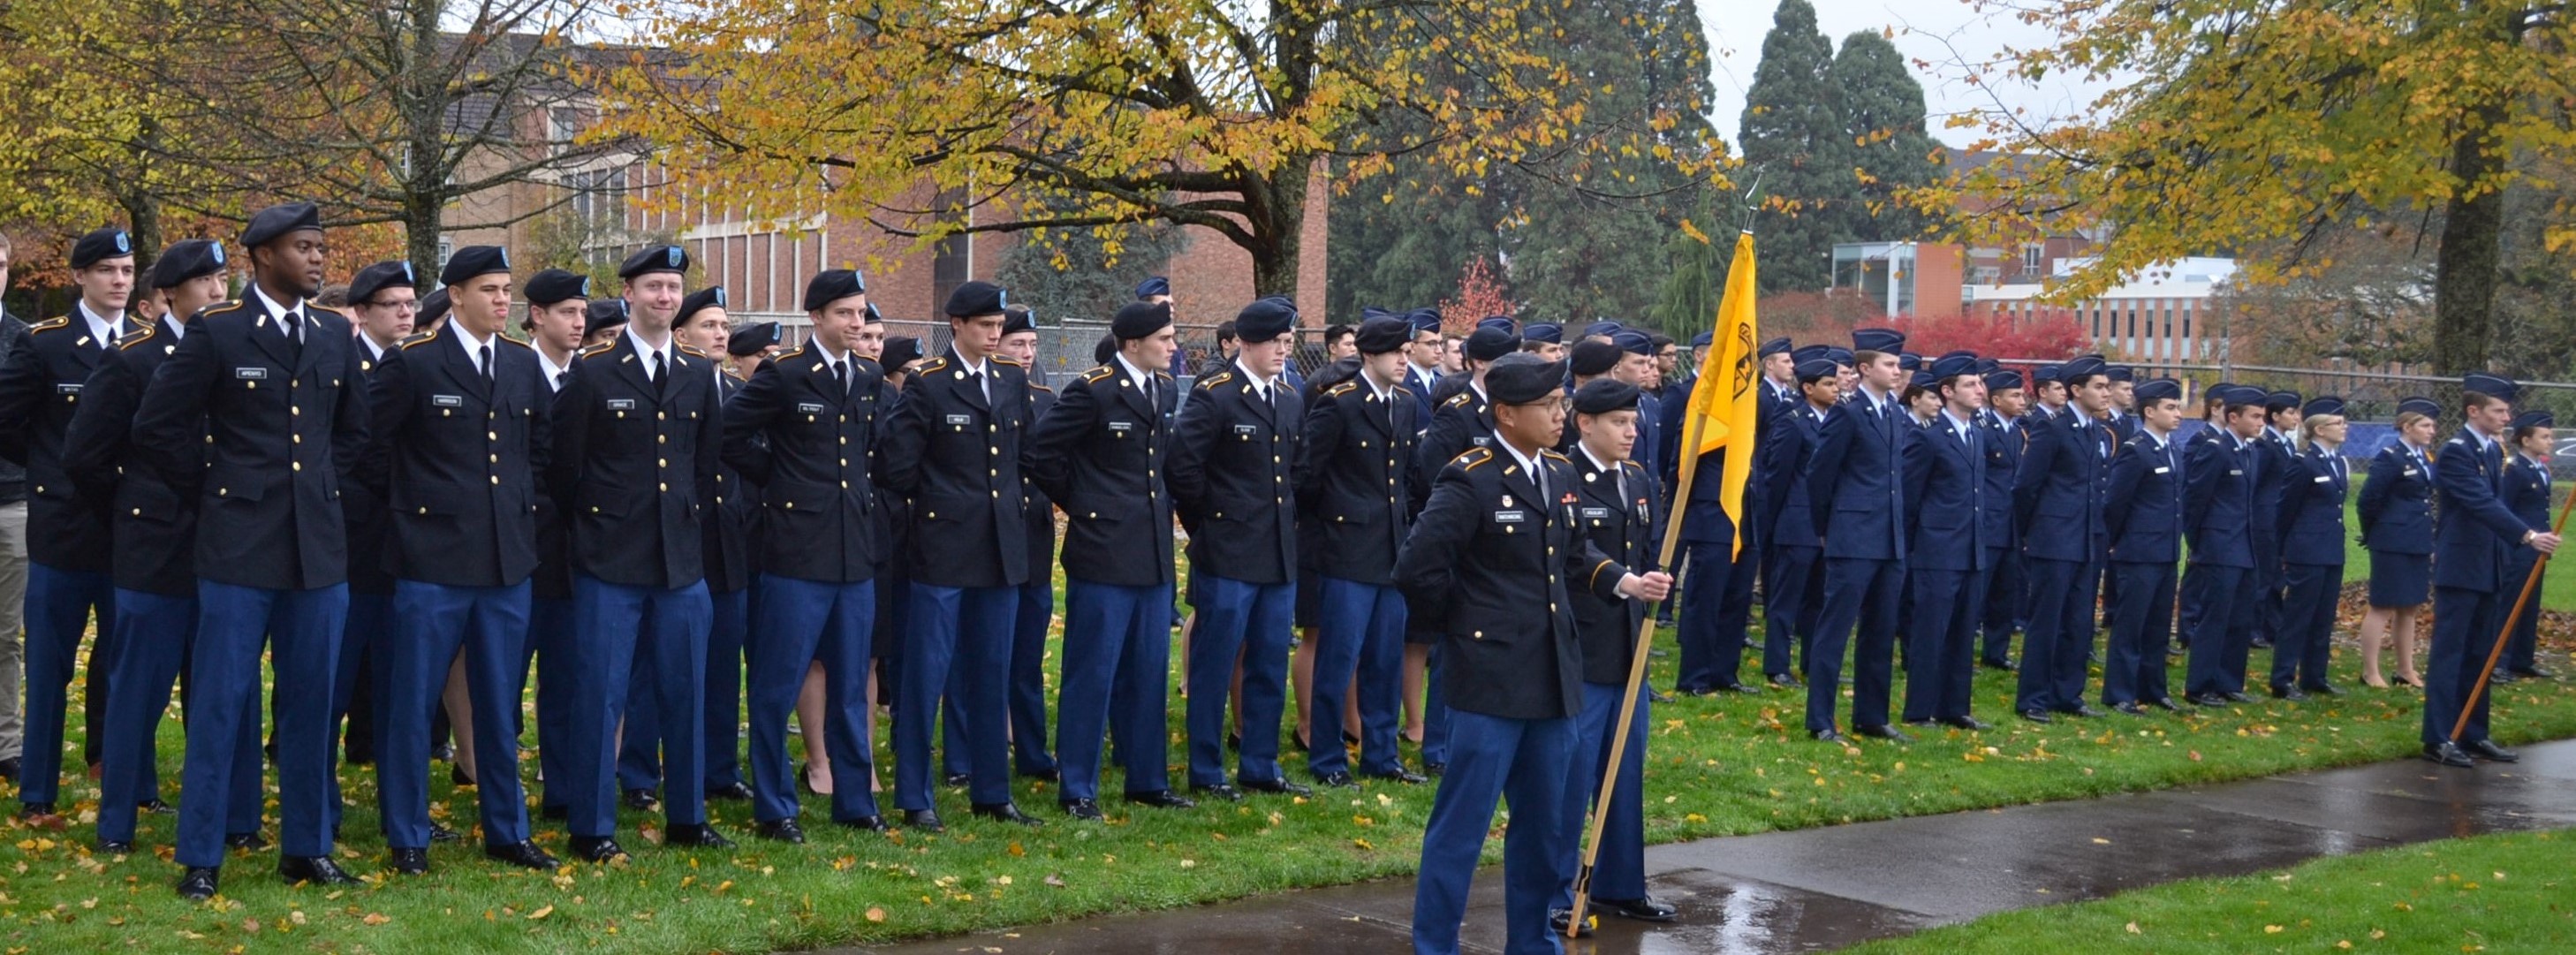 Cadets in formation for the 2017 Veteran's Day ceremony